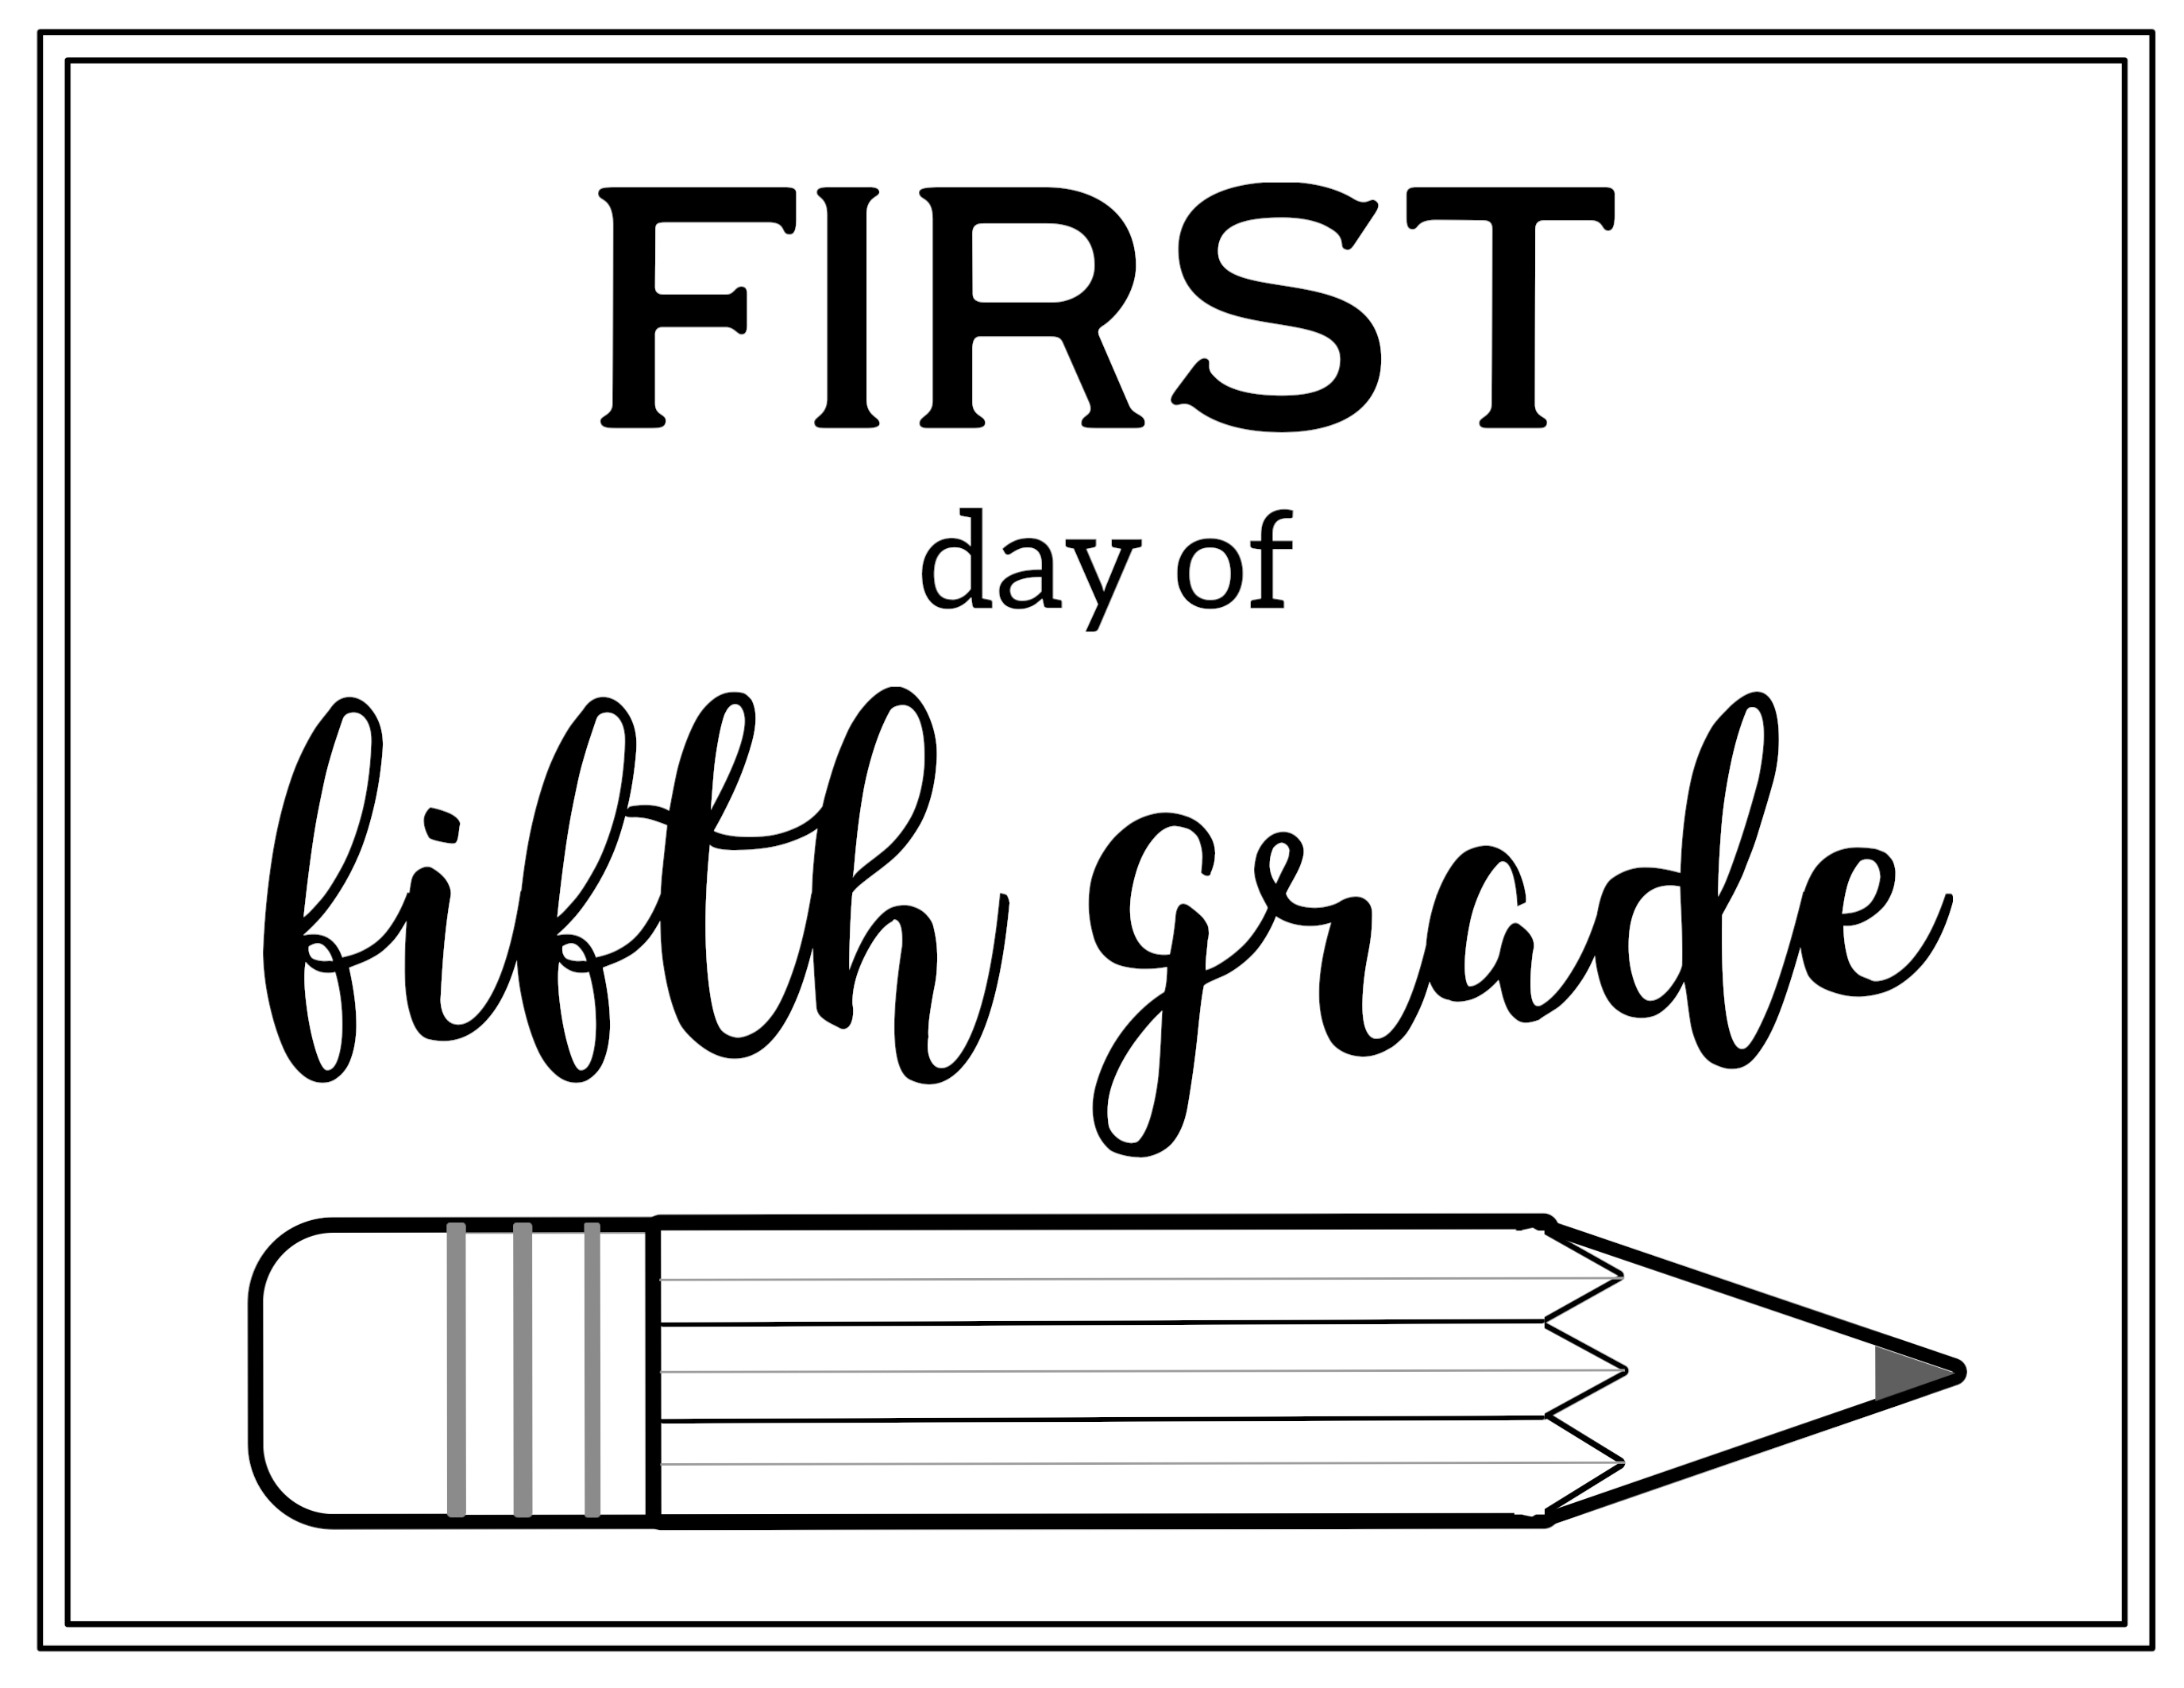 Free Printable First Day of School Sign {Pencil} Paper Trail Design